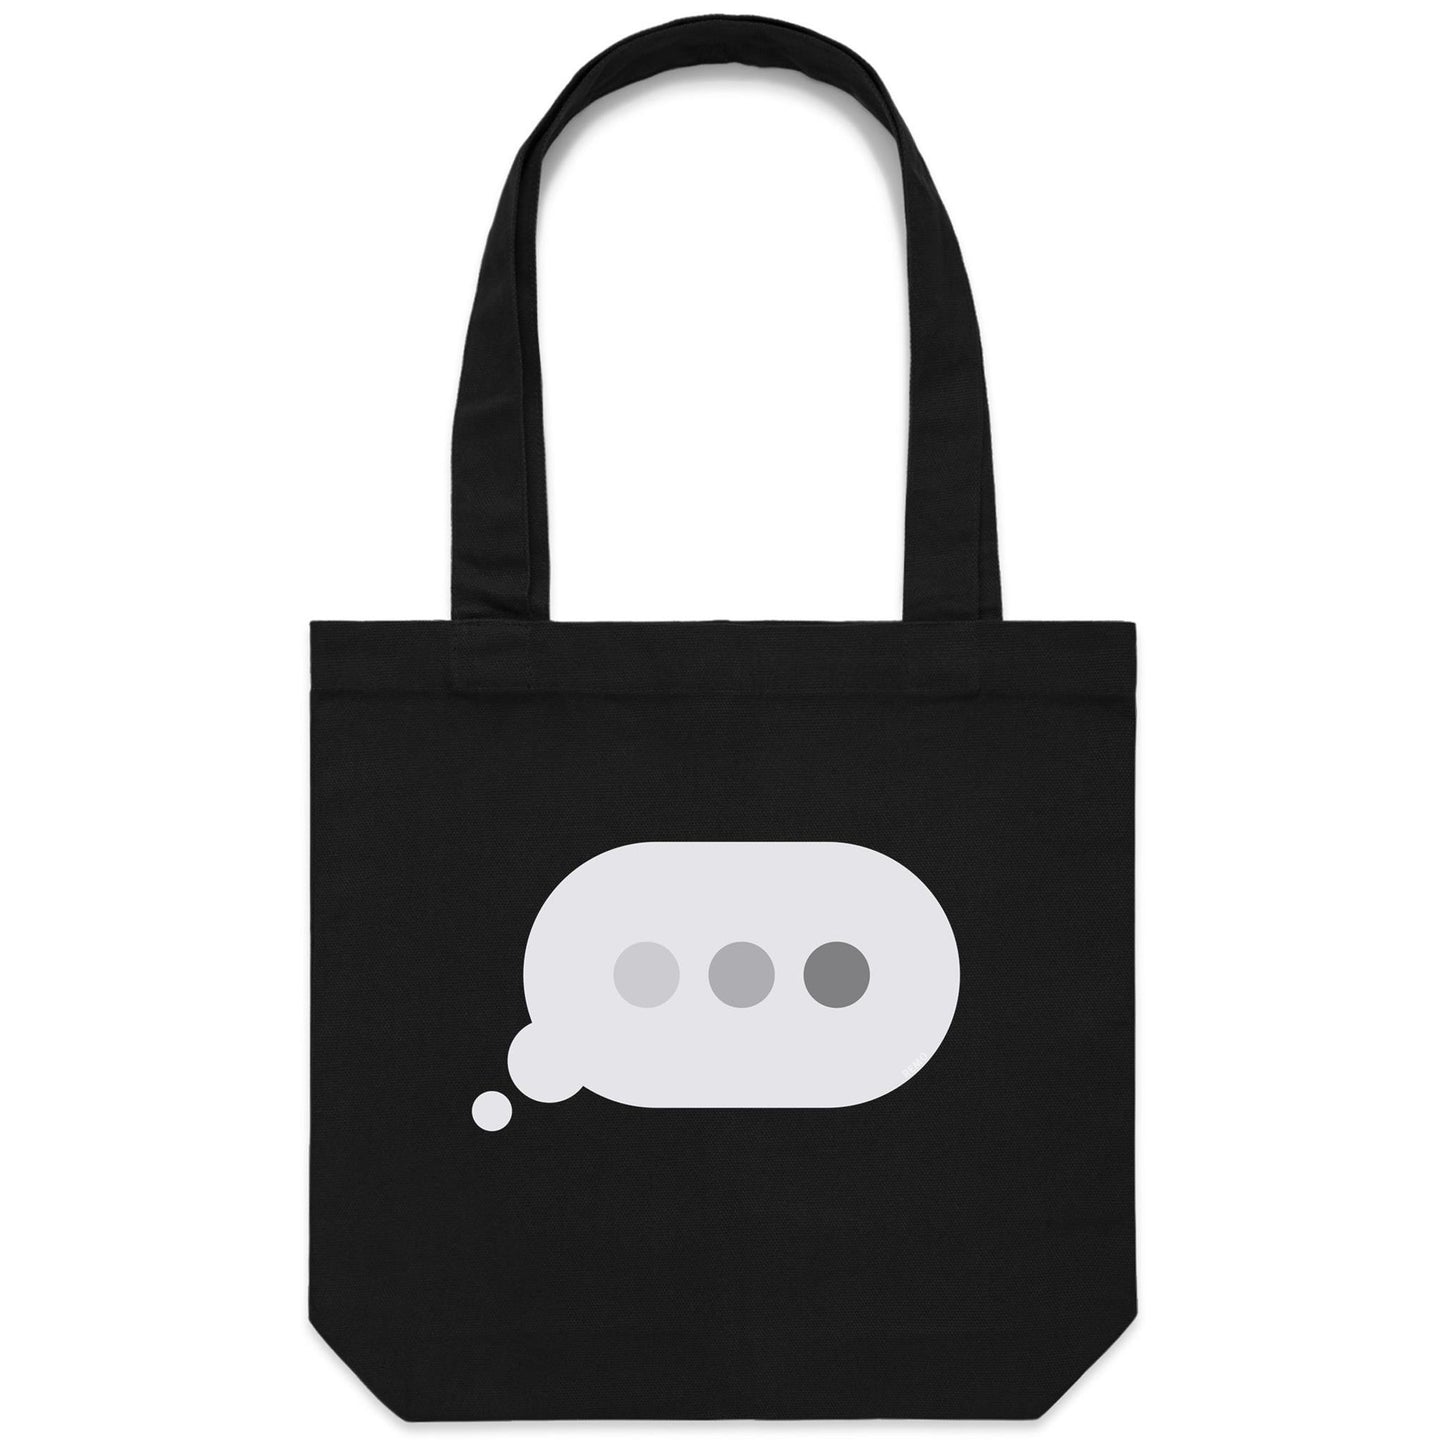 Typing Indicator Canvas Totes